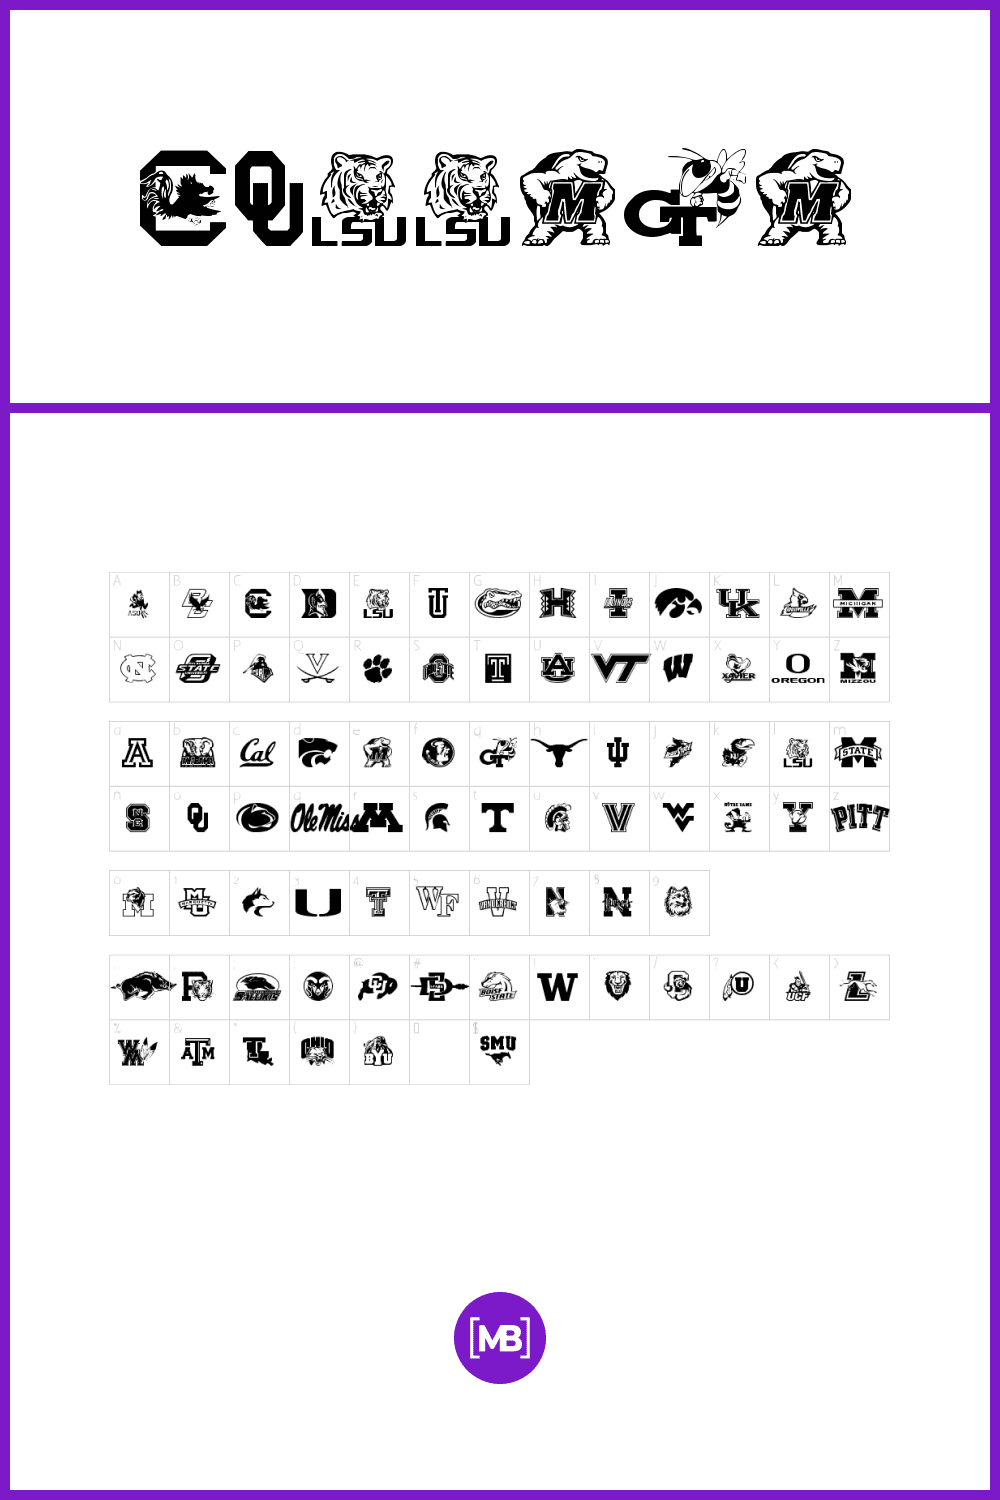 Font in different ornaments and illustrations.